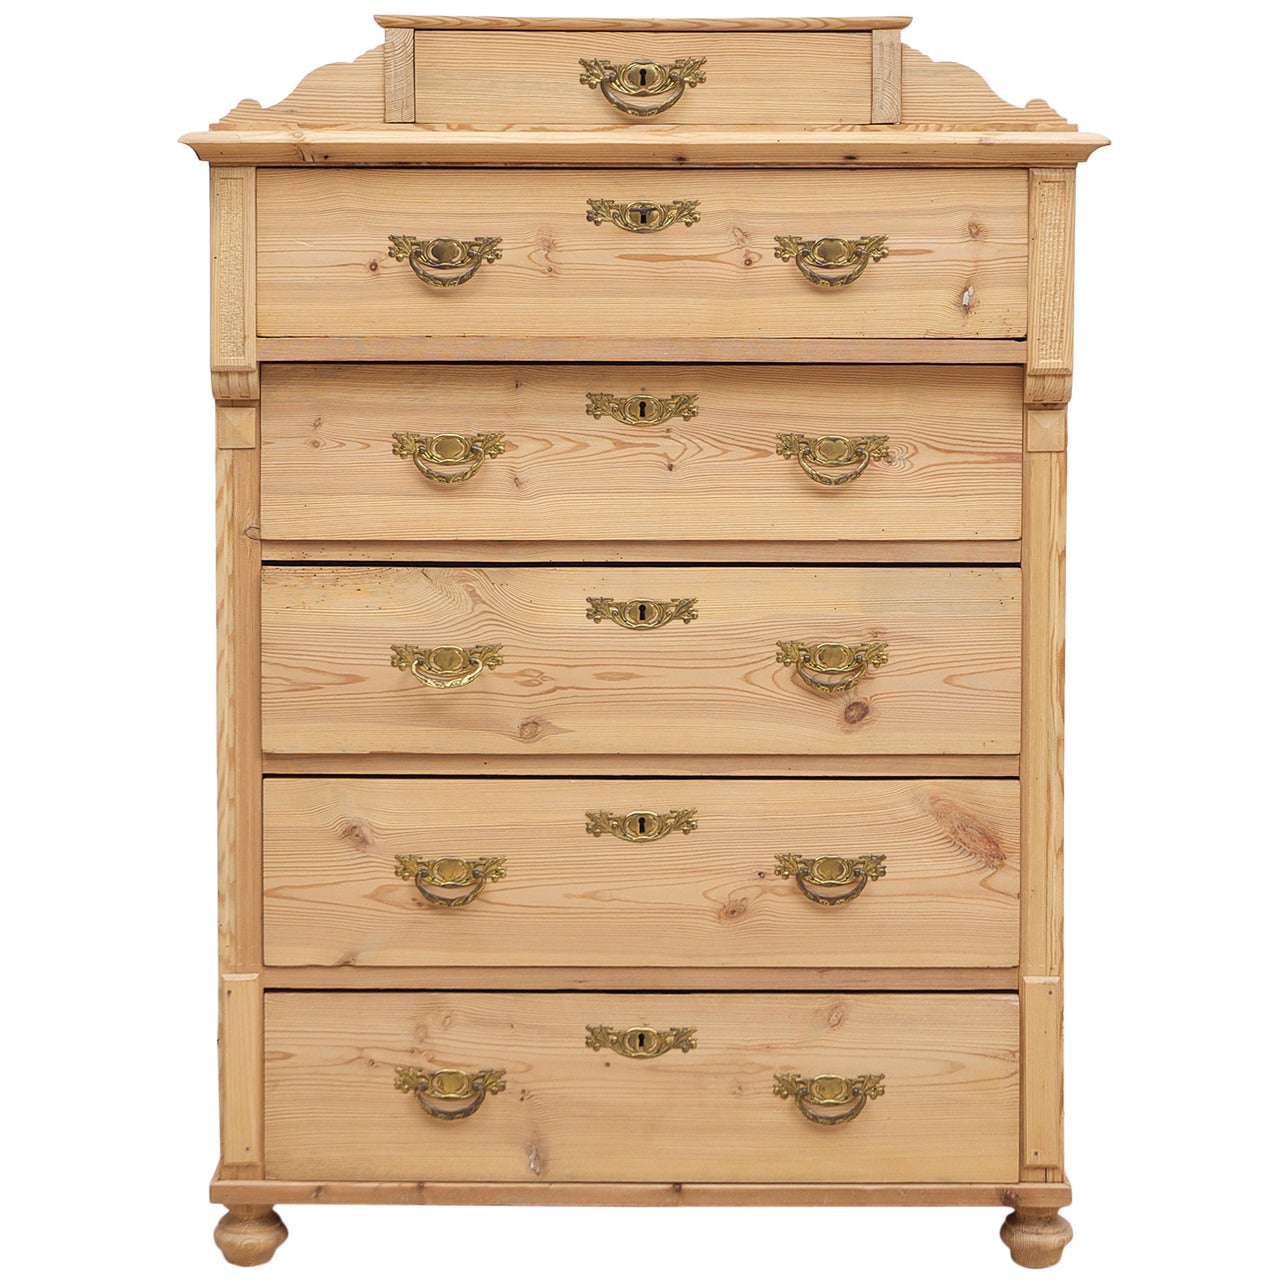 Tall Swedish Chest in Pine with Six Drawers, circa 1870